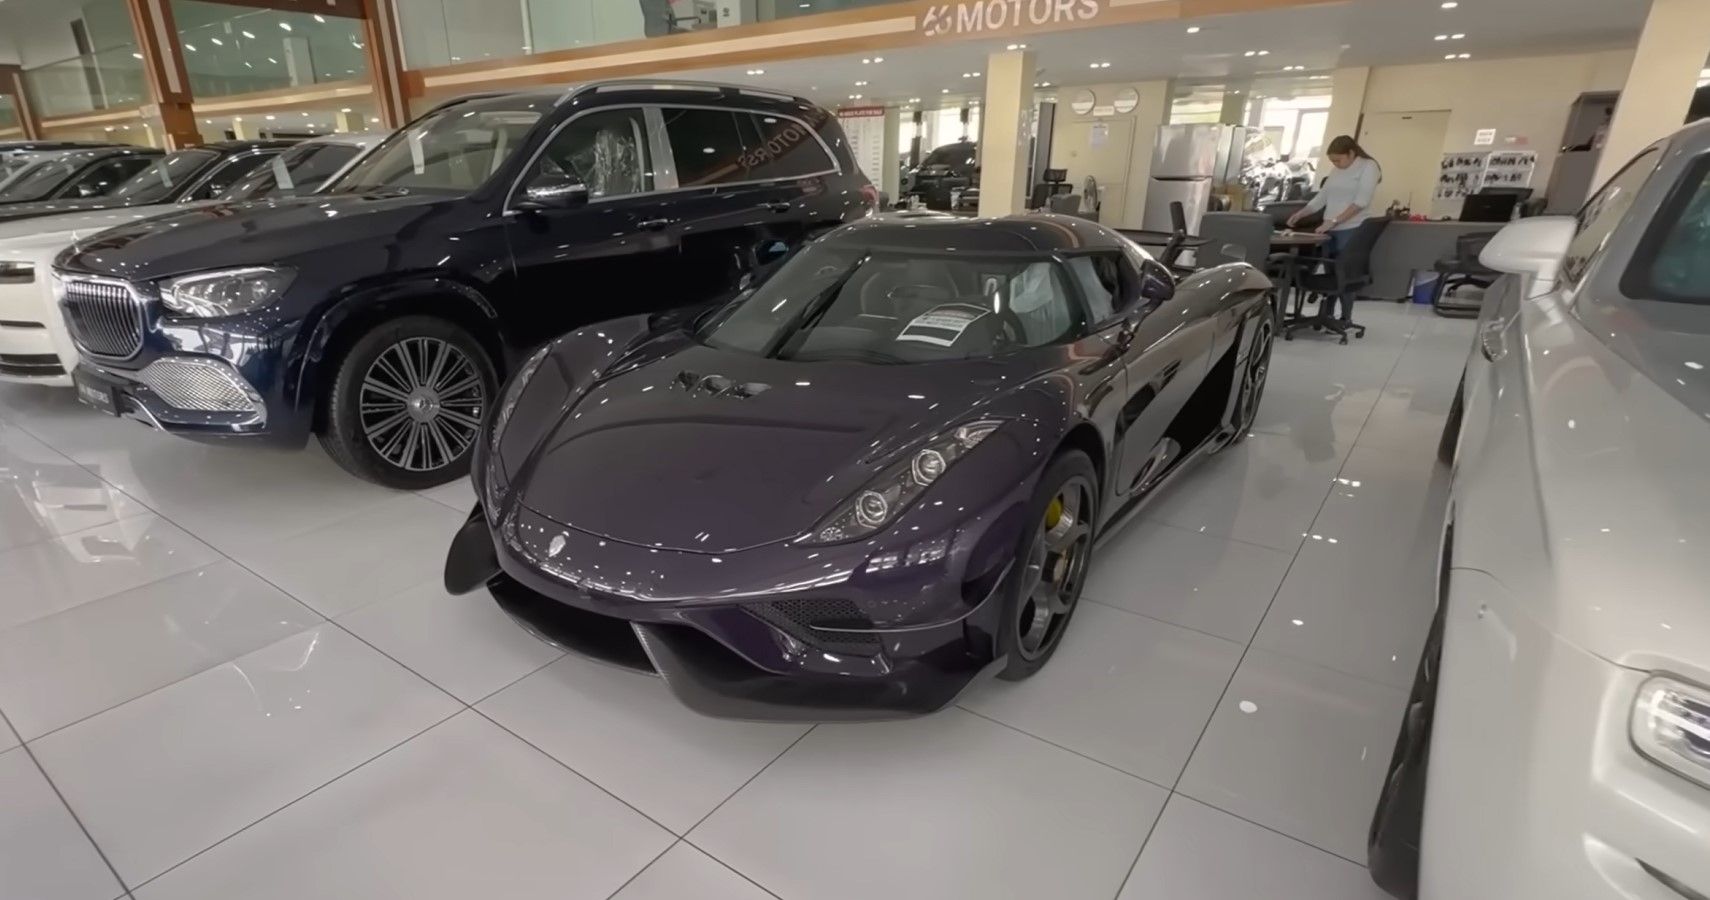 One-of-two purple-tinted carbon fiber Koenigsegg Regera in the world